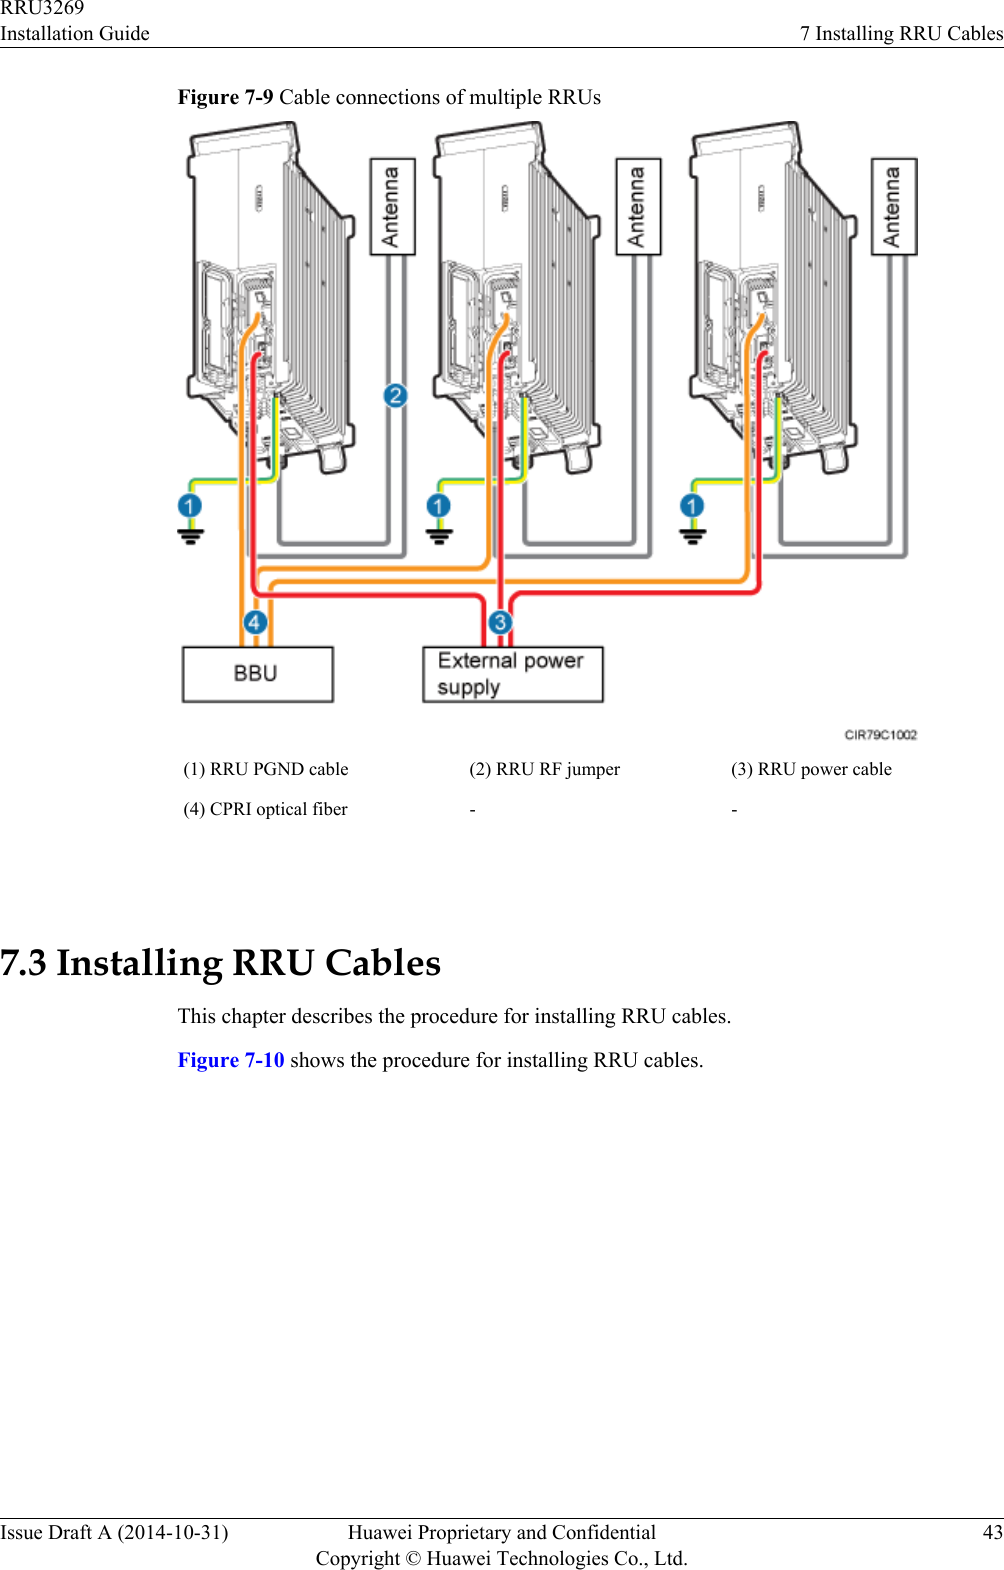 Figure 7-9 Cable connections of multiple RRUs(1) RRU PGND cable (2) RRU RF jumper (3) RRU power cable(4) CPRI optical fiber - - 7.3 Installing RRU CablesThis chapter describes the procedure for installing RRU cables.Figure 7-10 shows the procedure for installing RRU cables.RRU3269Installation Guide 7 Installing RRU CablesIssue Draft A (2014-10-31) Huawei Proprietary and ConfidentialCopyright © Huawei Technologies Co., Ltd.43